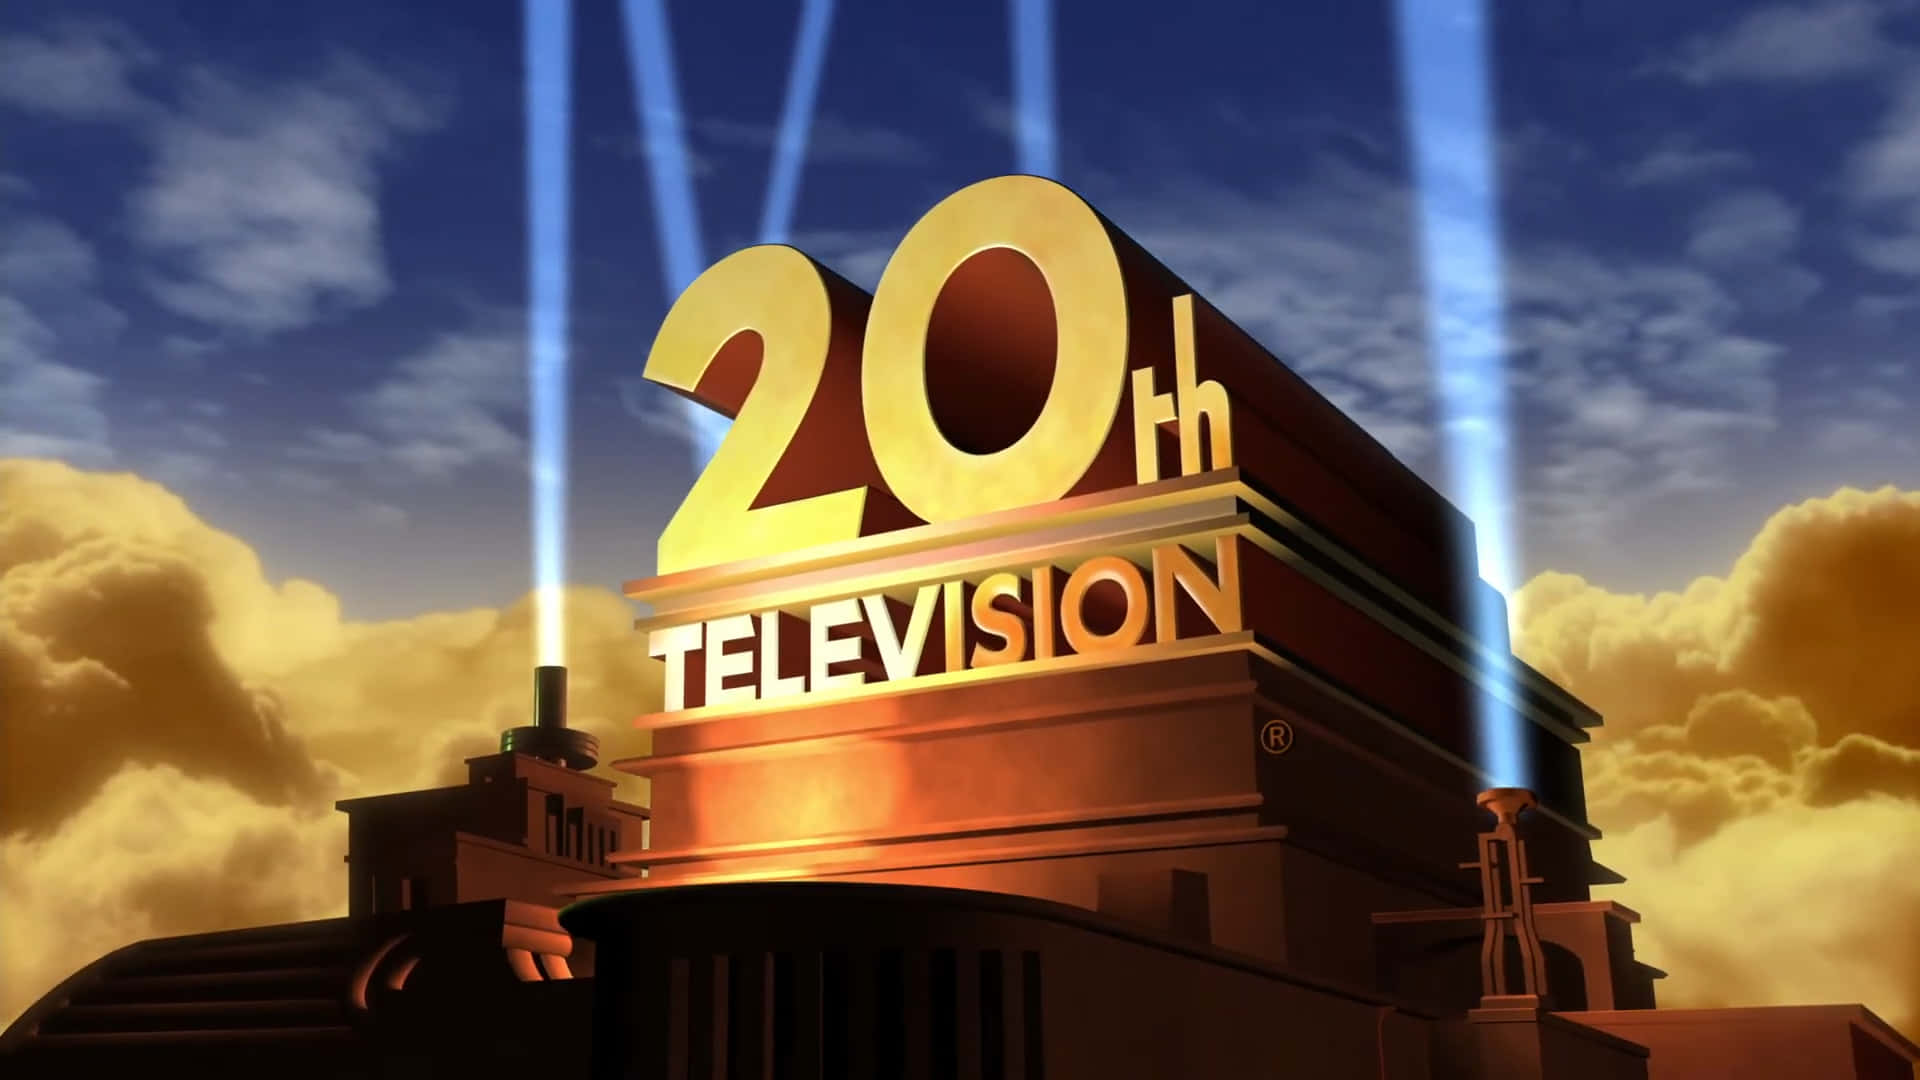 20th Television Logo With A Light Shining On It